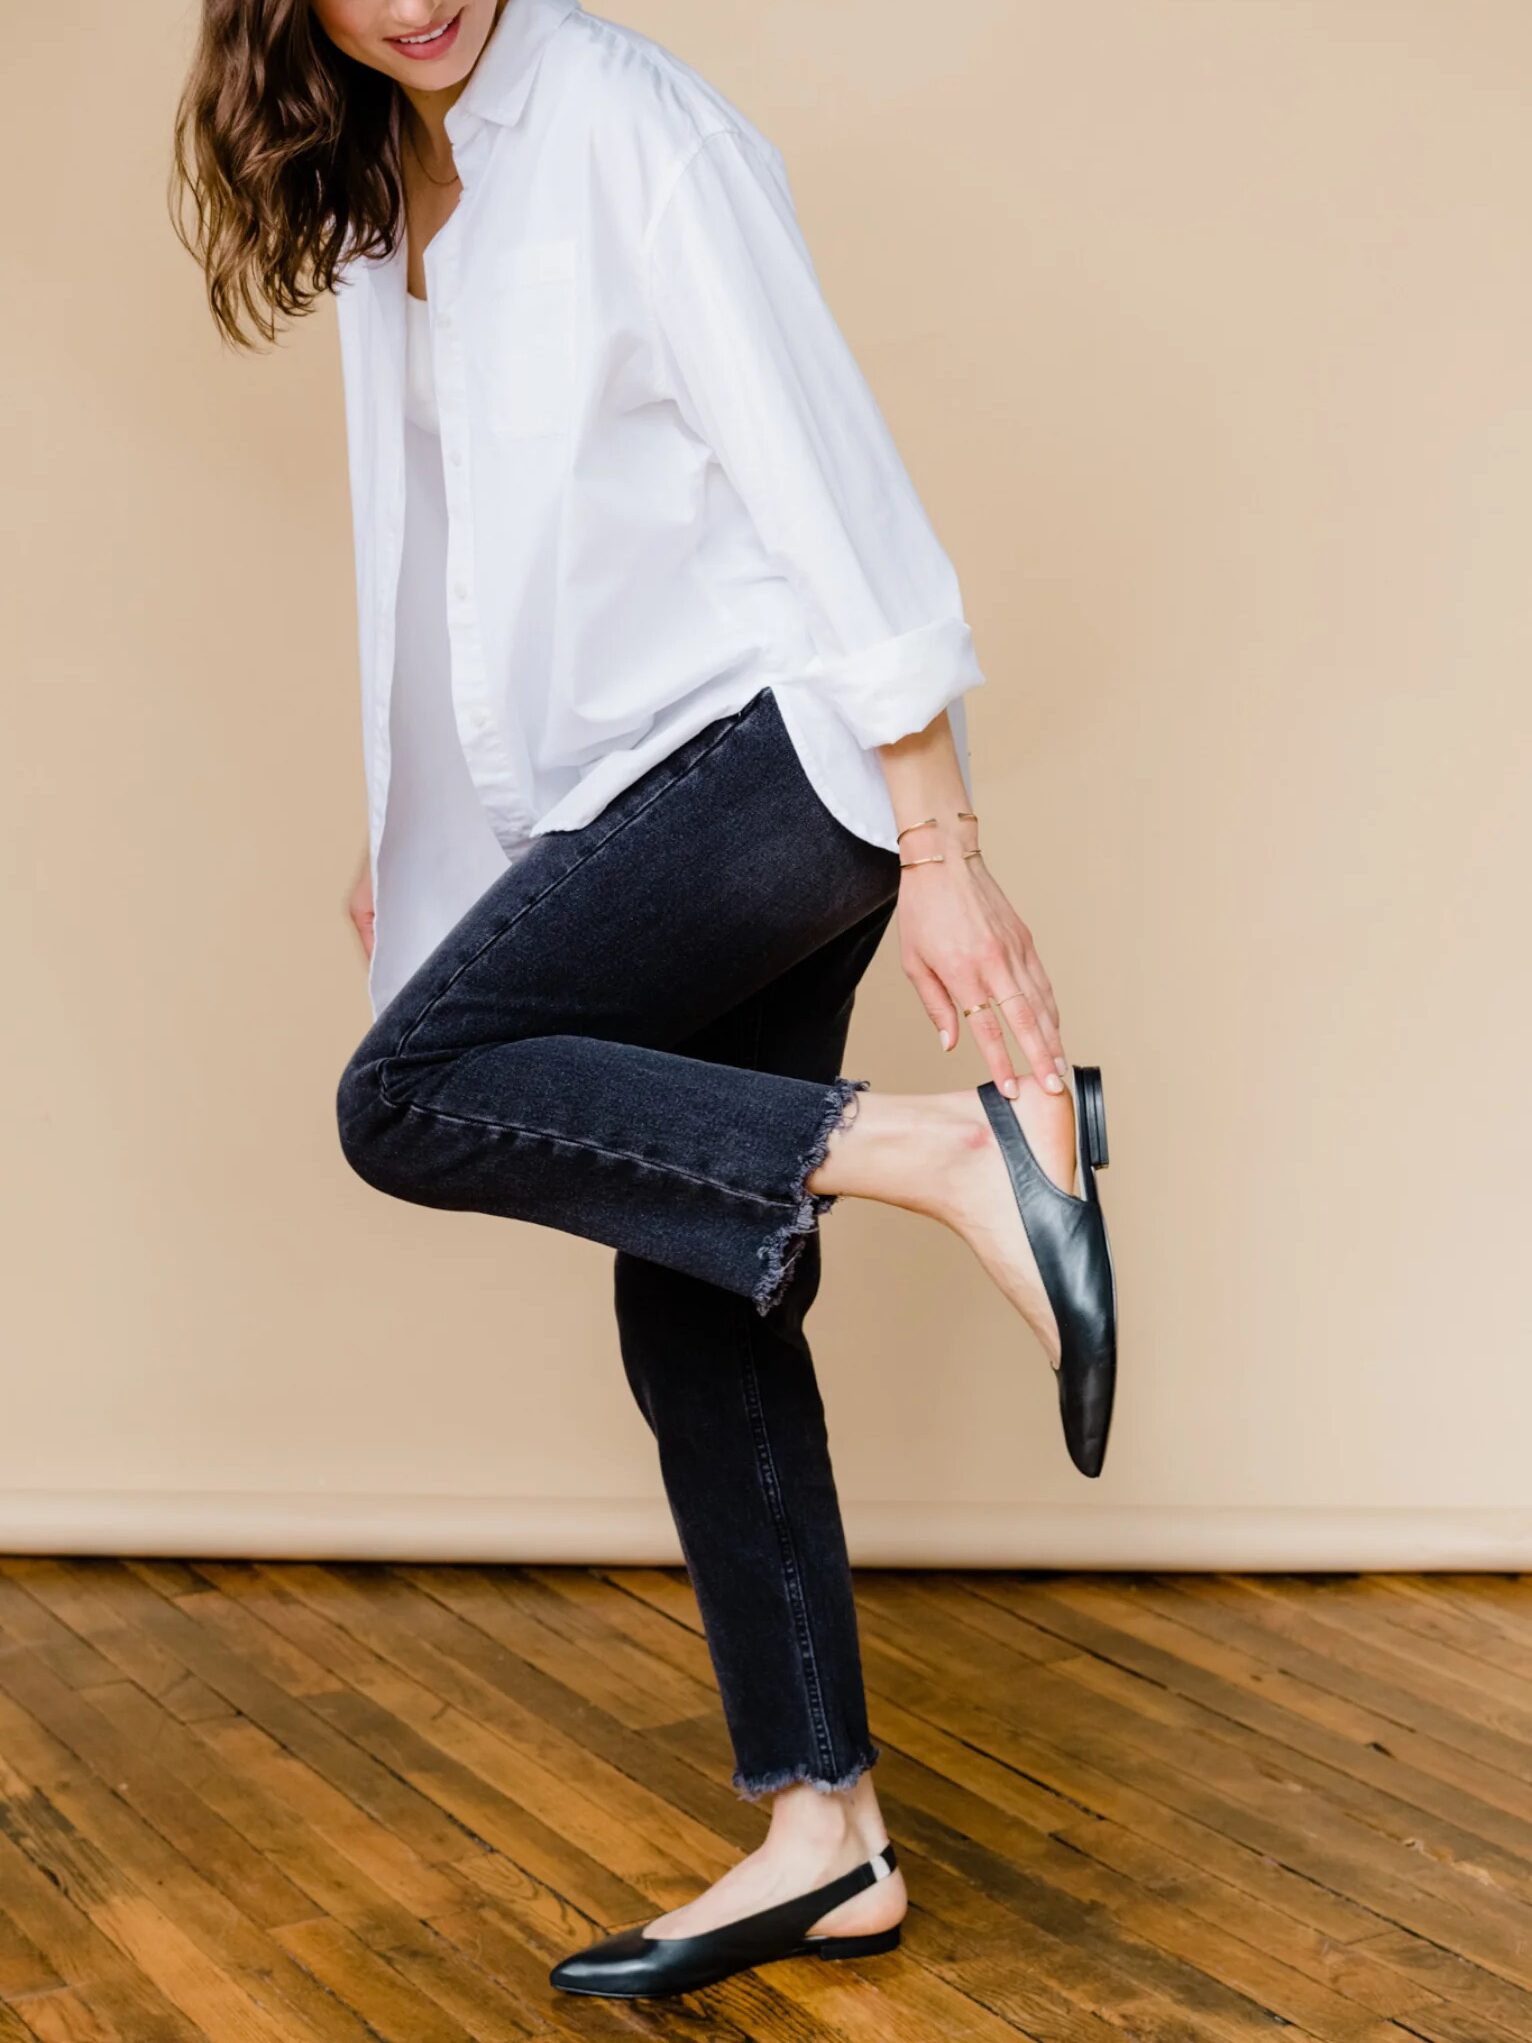 Woman in a white shirt and distressed jeans adjusting her black flat shoe, standing against a beige background.